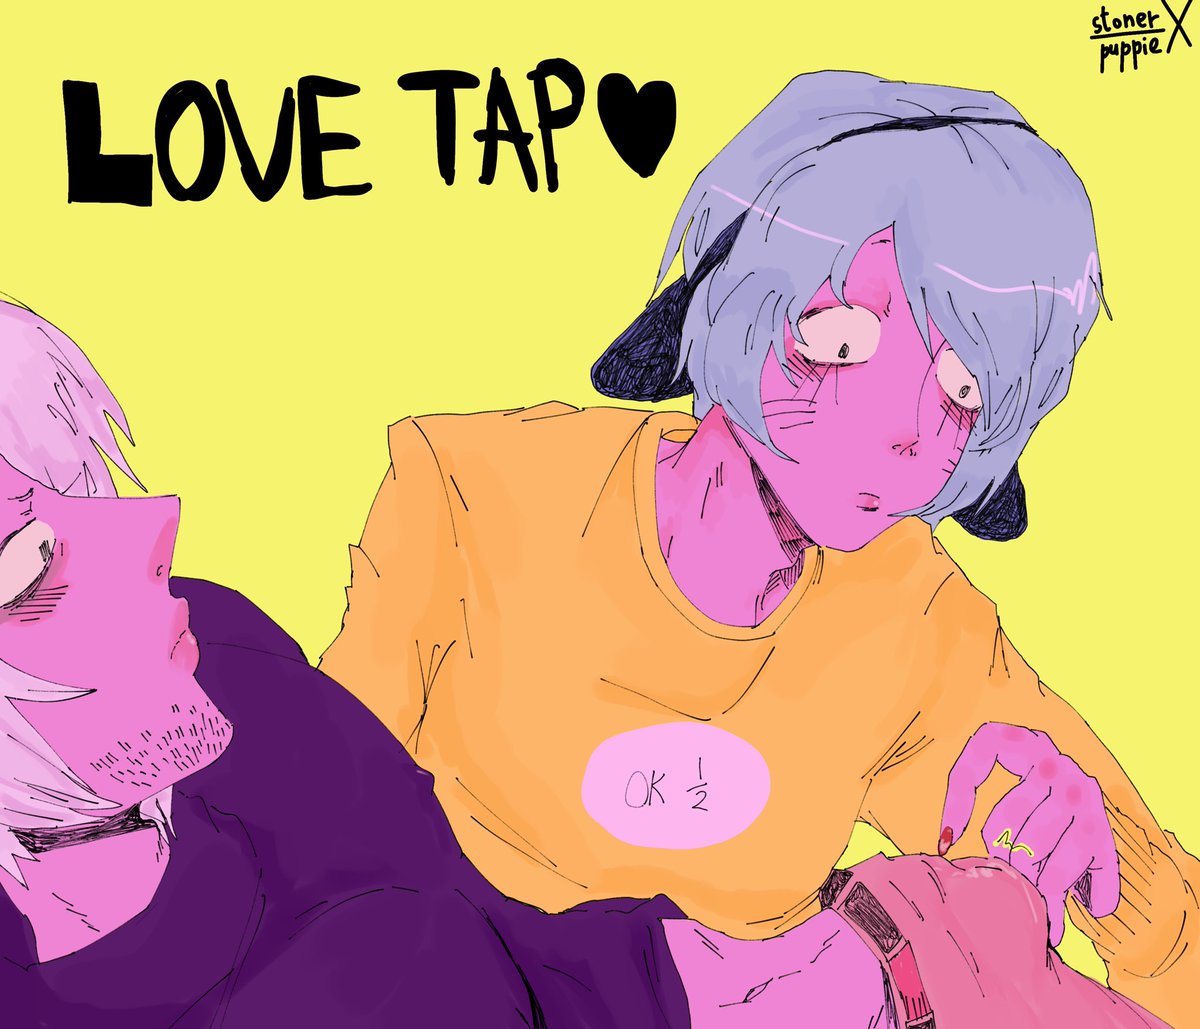 “love tap” stonerpuppified ^^ perhaps i’ll do more old art porn (my ex husband took the kids and the house, but atleast xxx_leechqueen69_xxx noticed me. totally worth it!